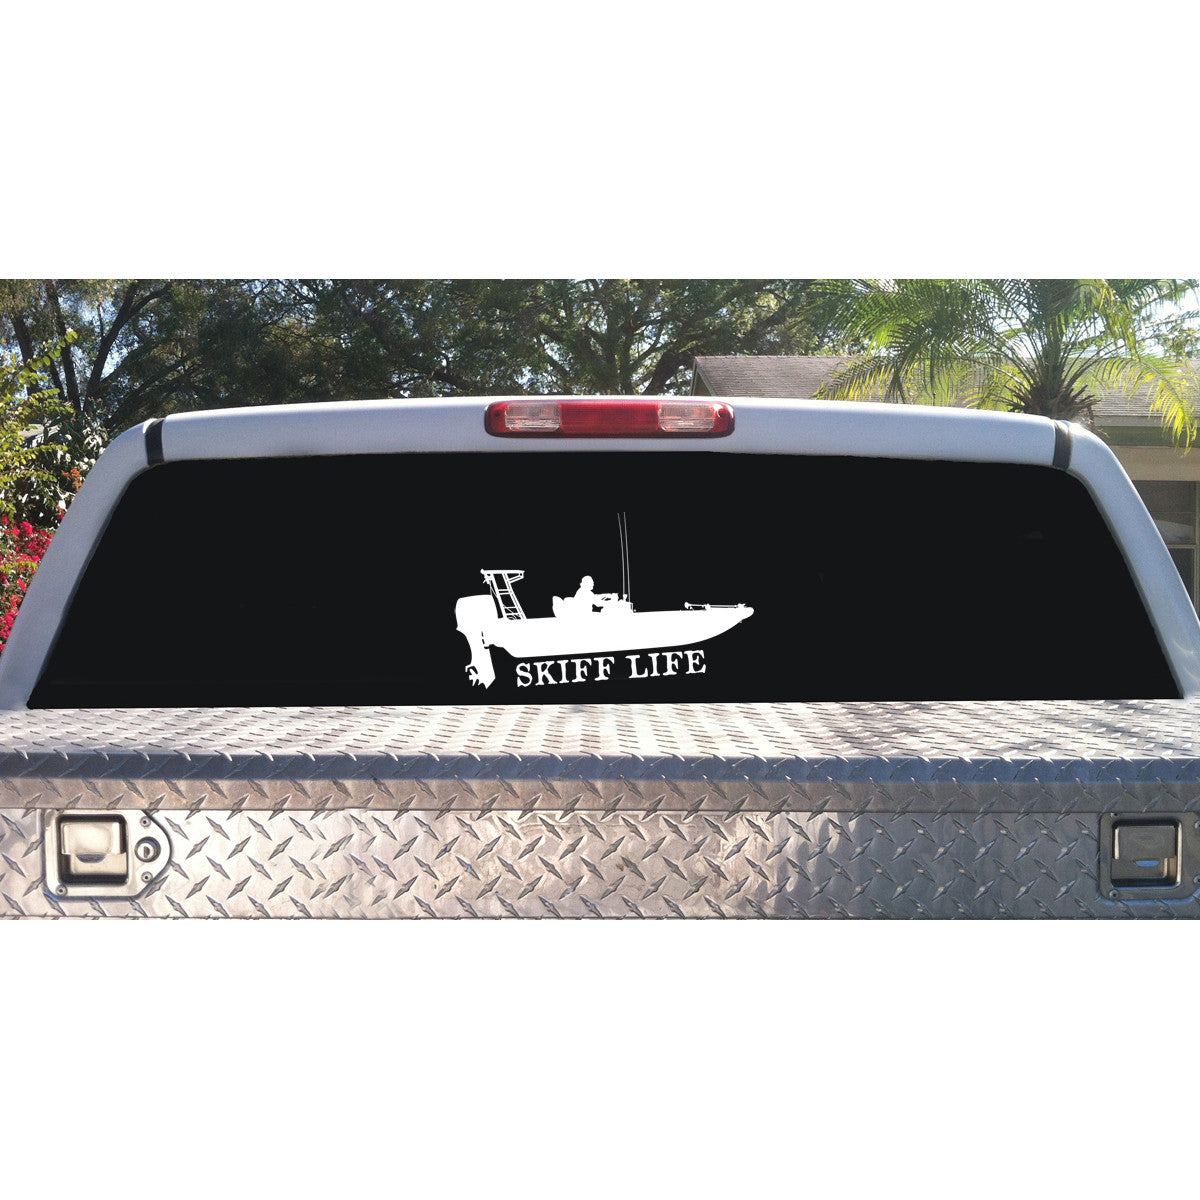 T-Top Center Console Fishing Boat Decal Boat Stickers Black No Skiff Life